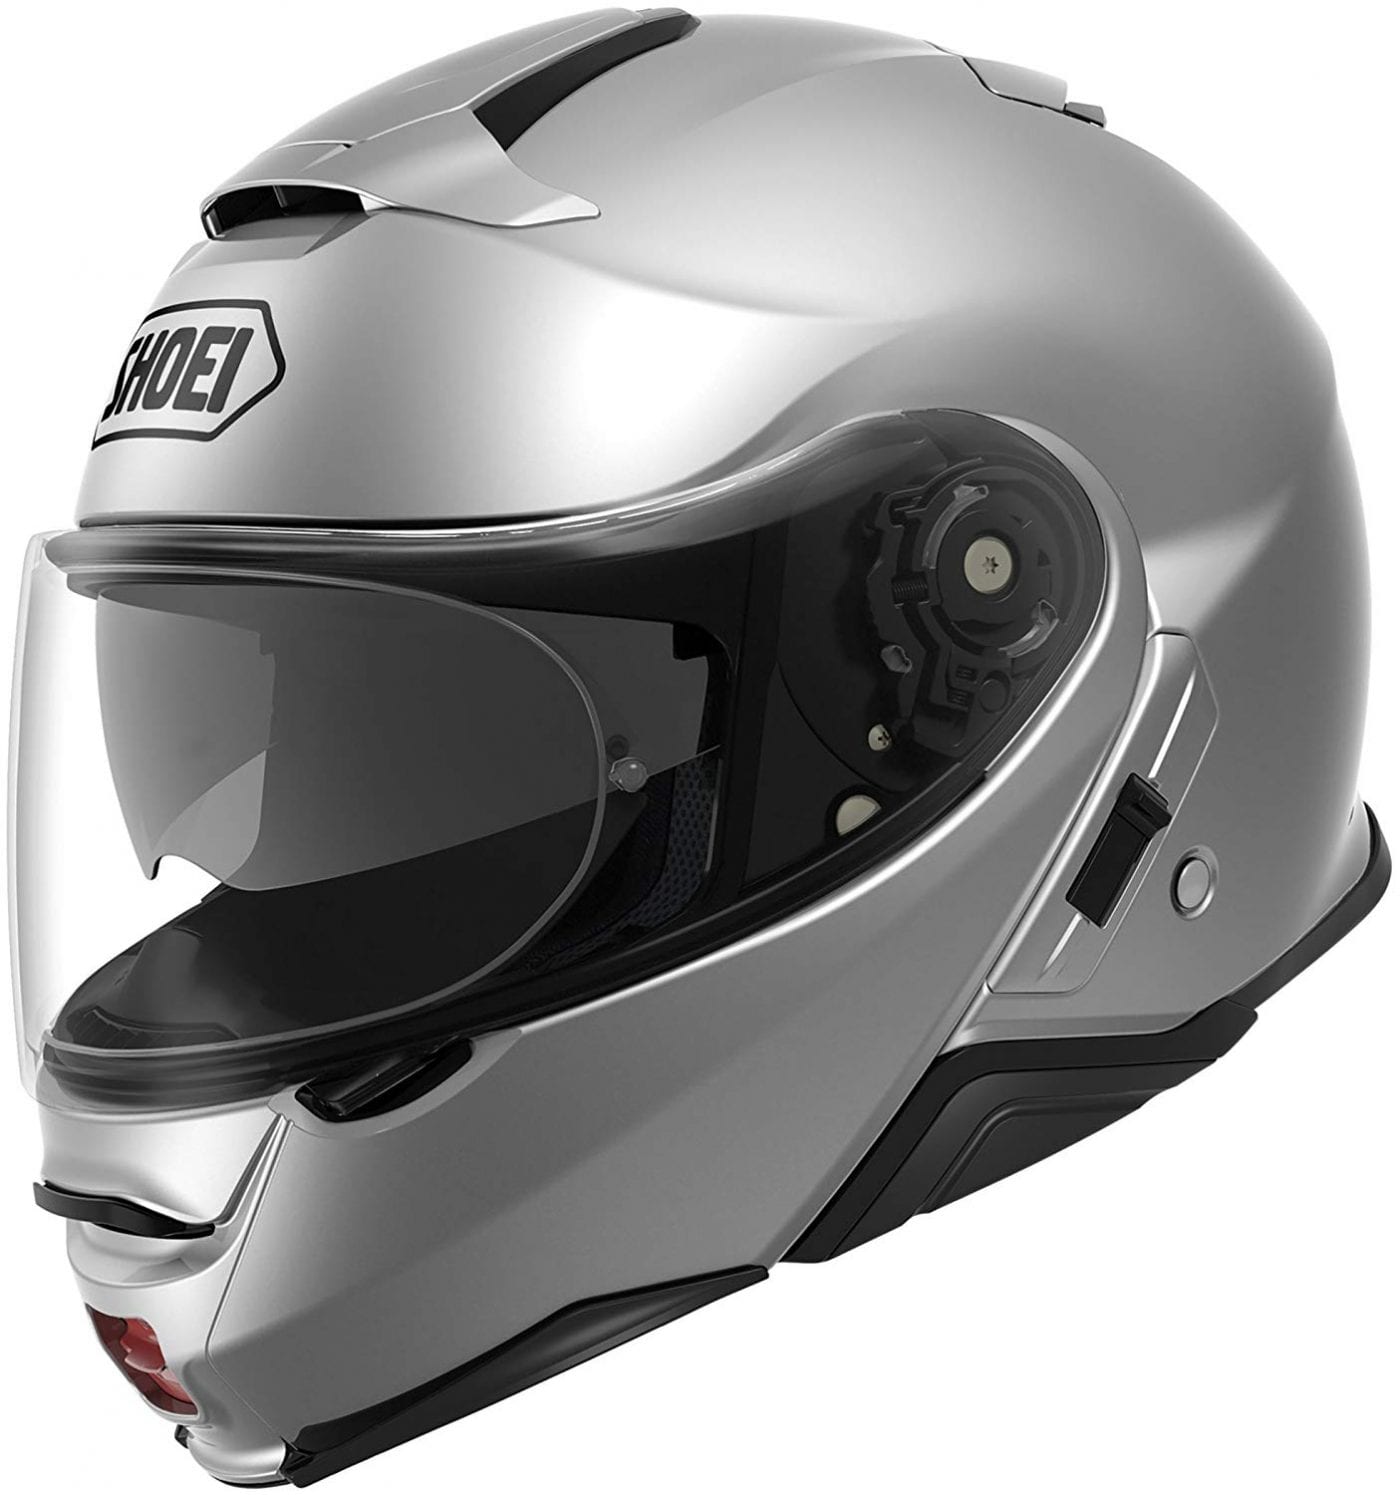 Shocking Collections Of motorcycle helmet rental Images